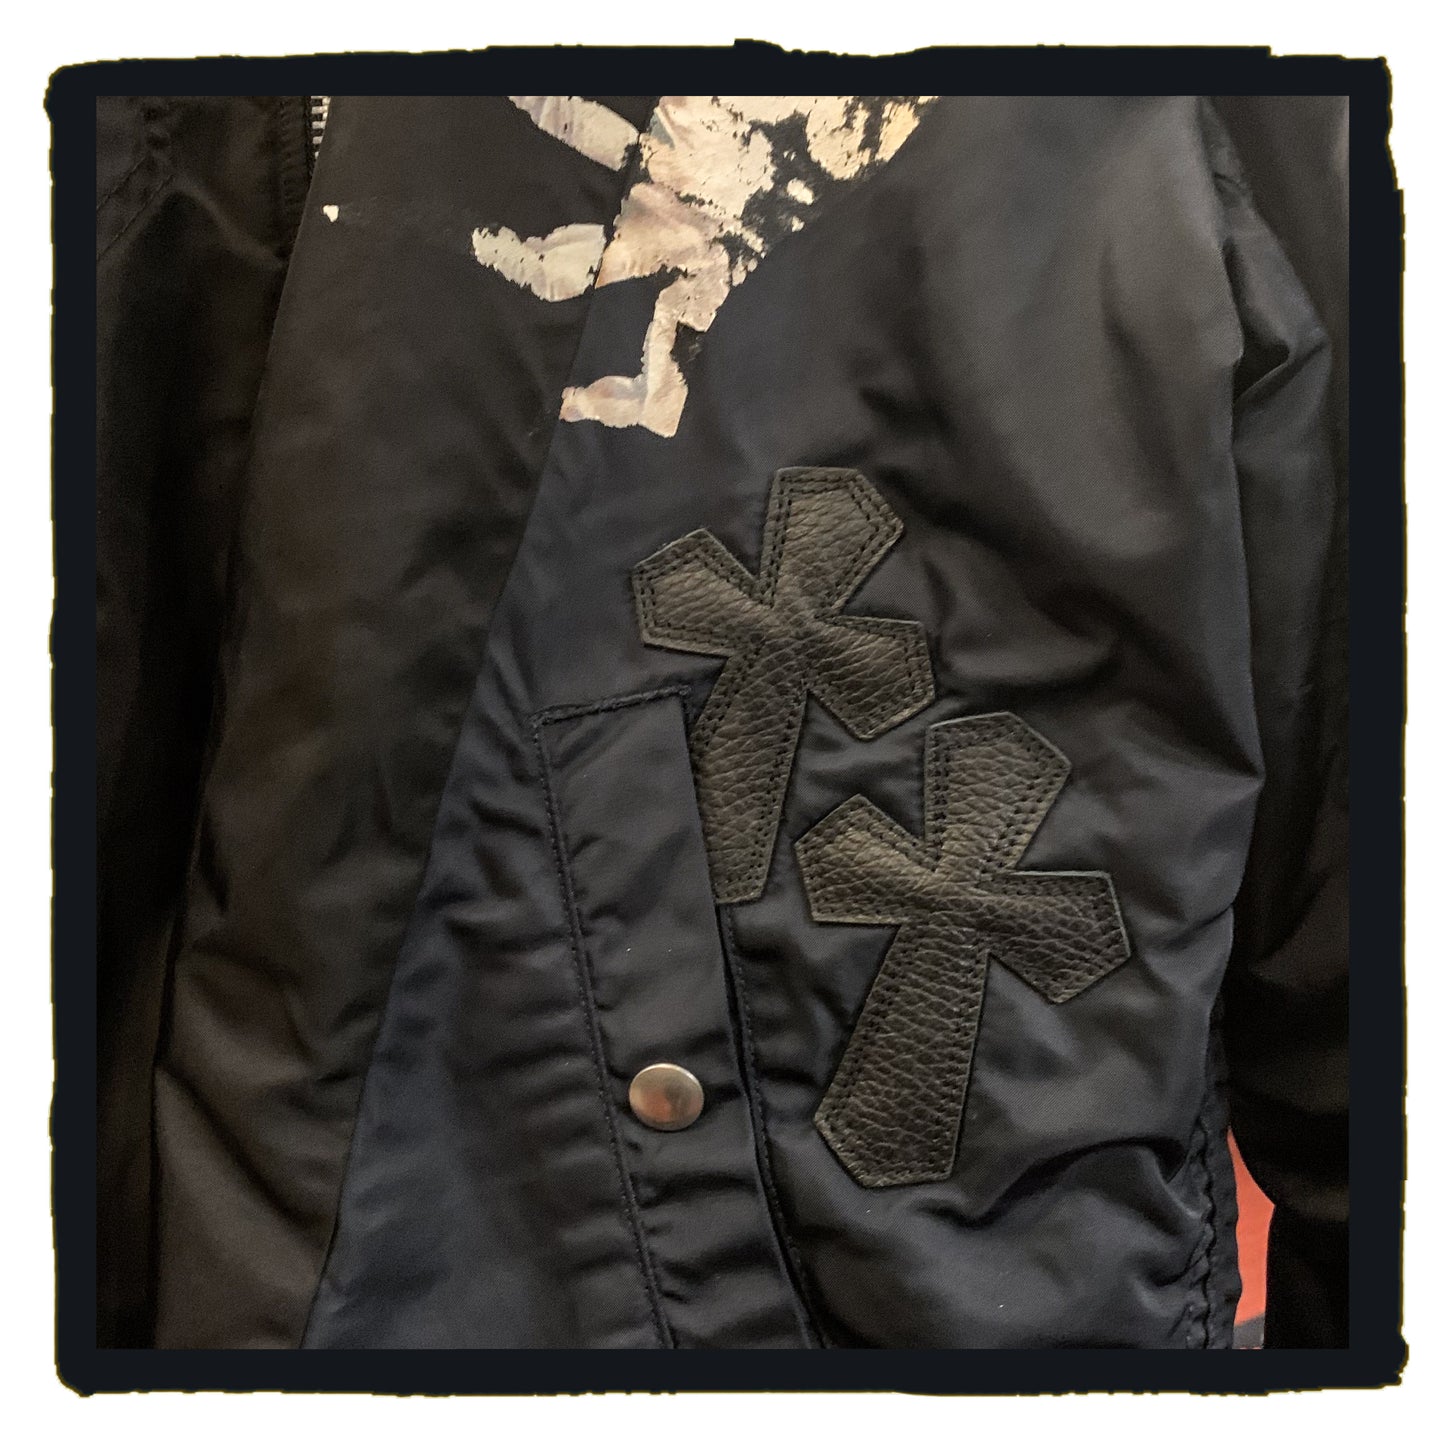 reborn project - undercover bomber jacket